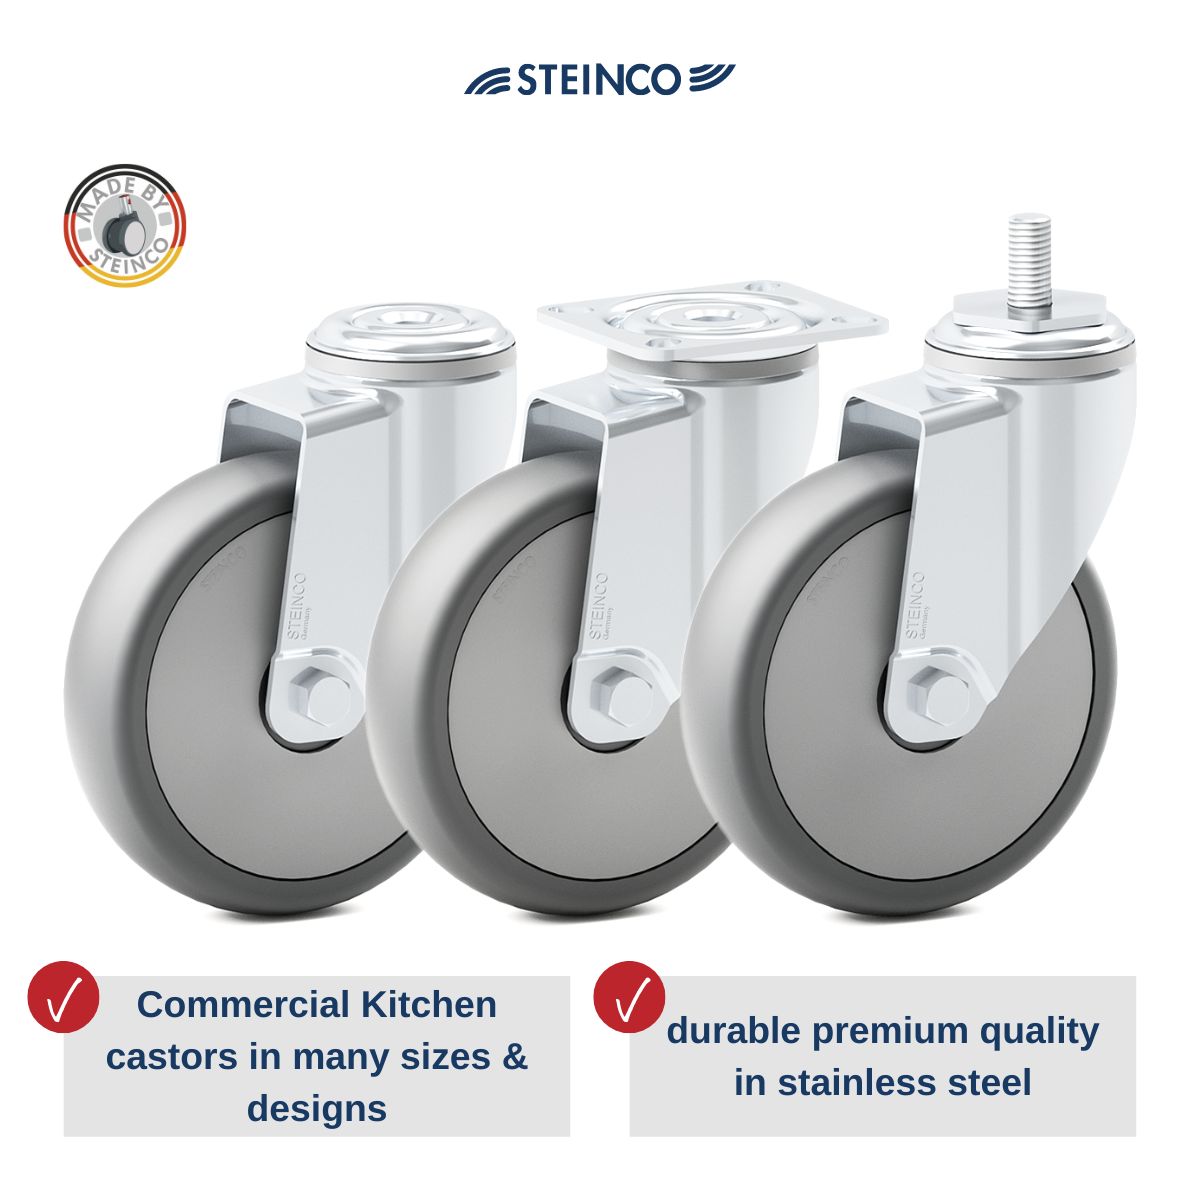 stainless steel castors and wheels according to DIN 18867-8 for stainless steel furniture & stainless steel trolleys in Commercial Kitchens, canteens and the food industry